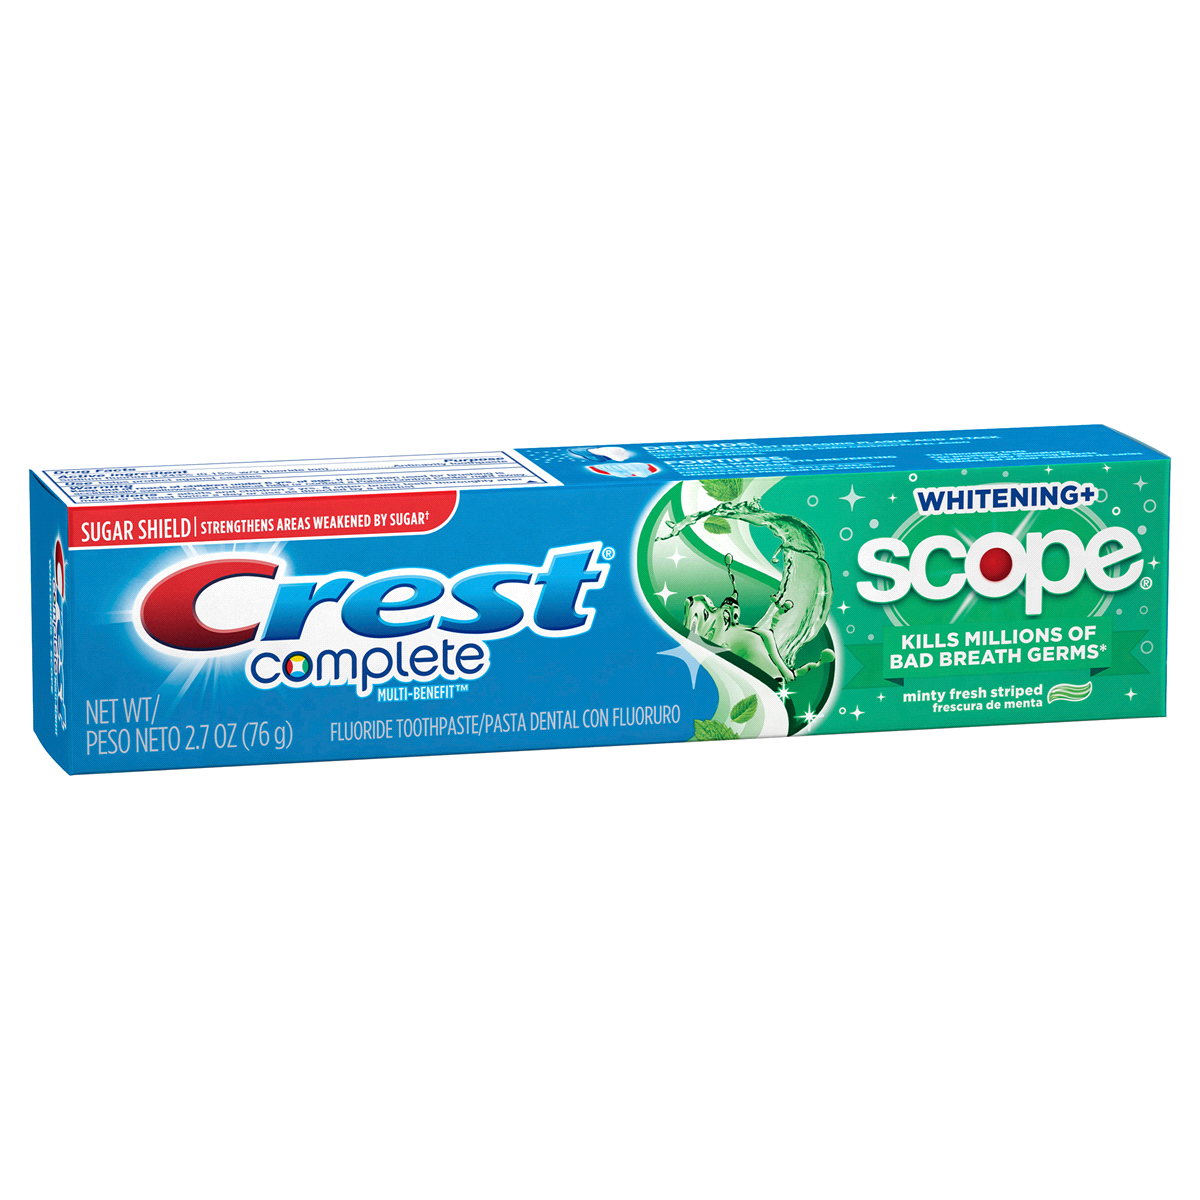 slide 2 of 3, Crest Complete Whitening + Scope Multi-benefit Minty Fresh Striped Toothpaste, 2.7 oz